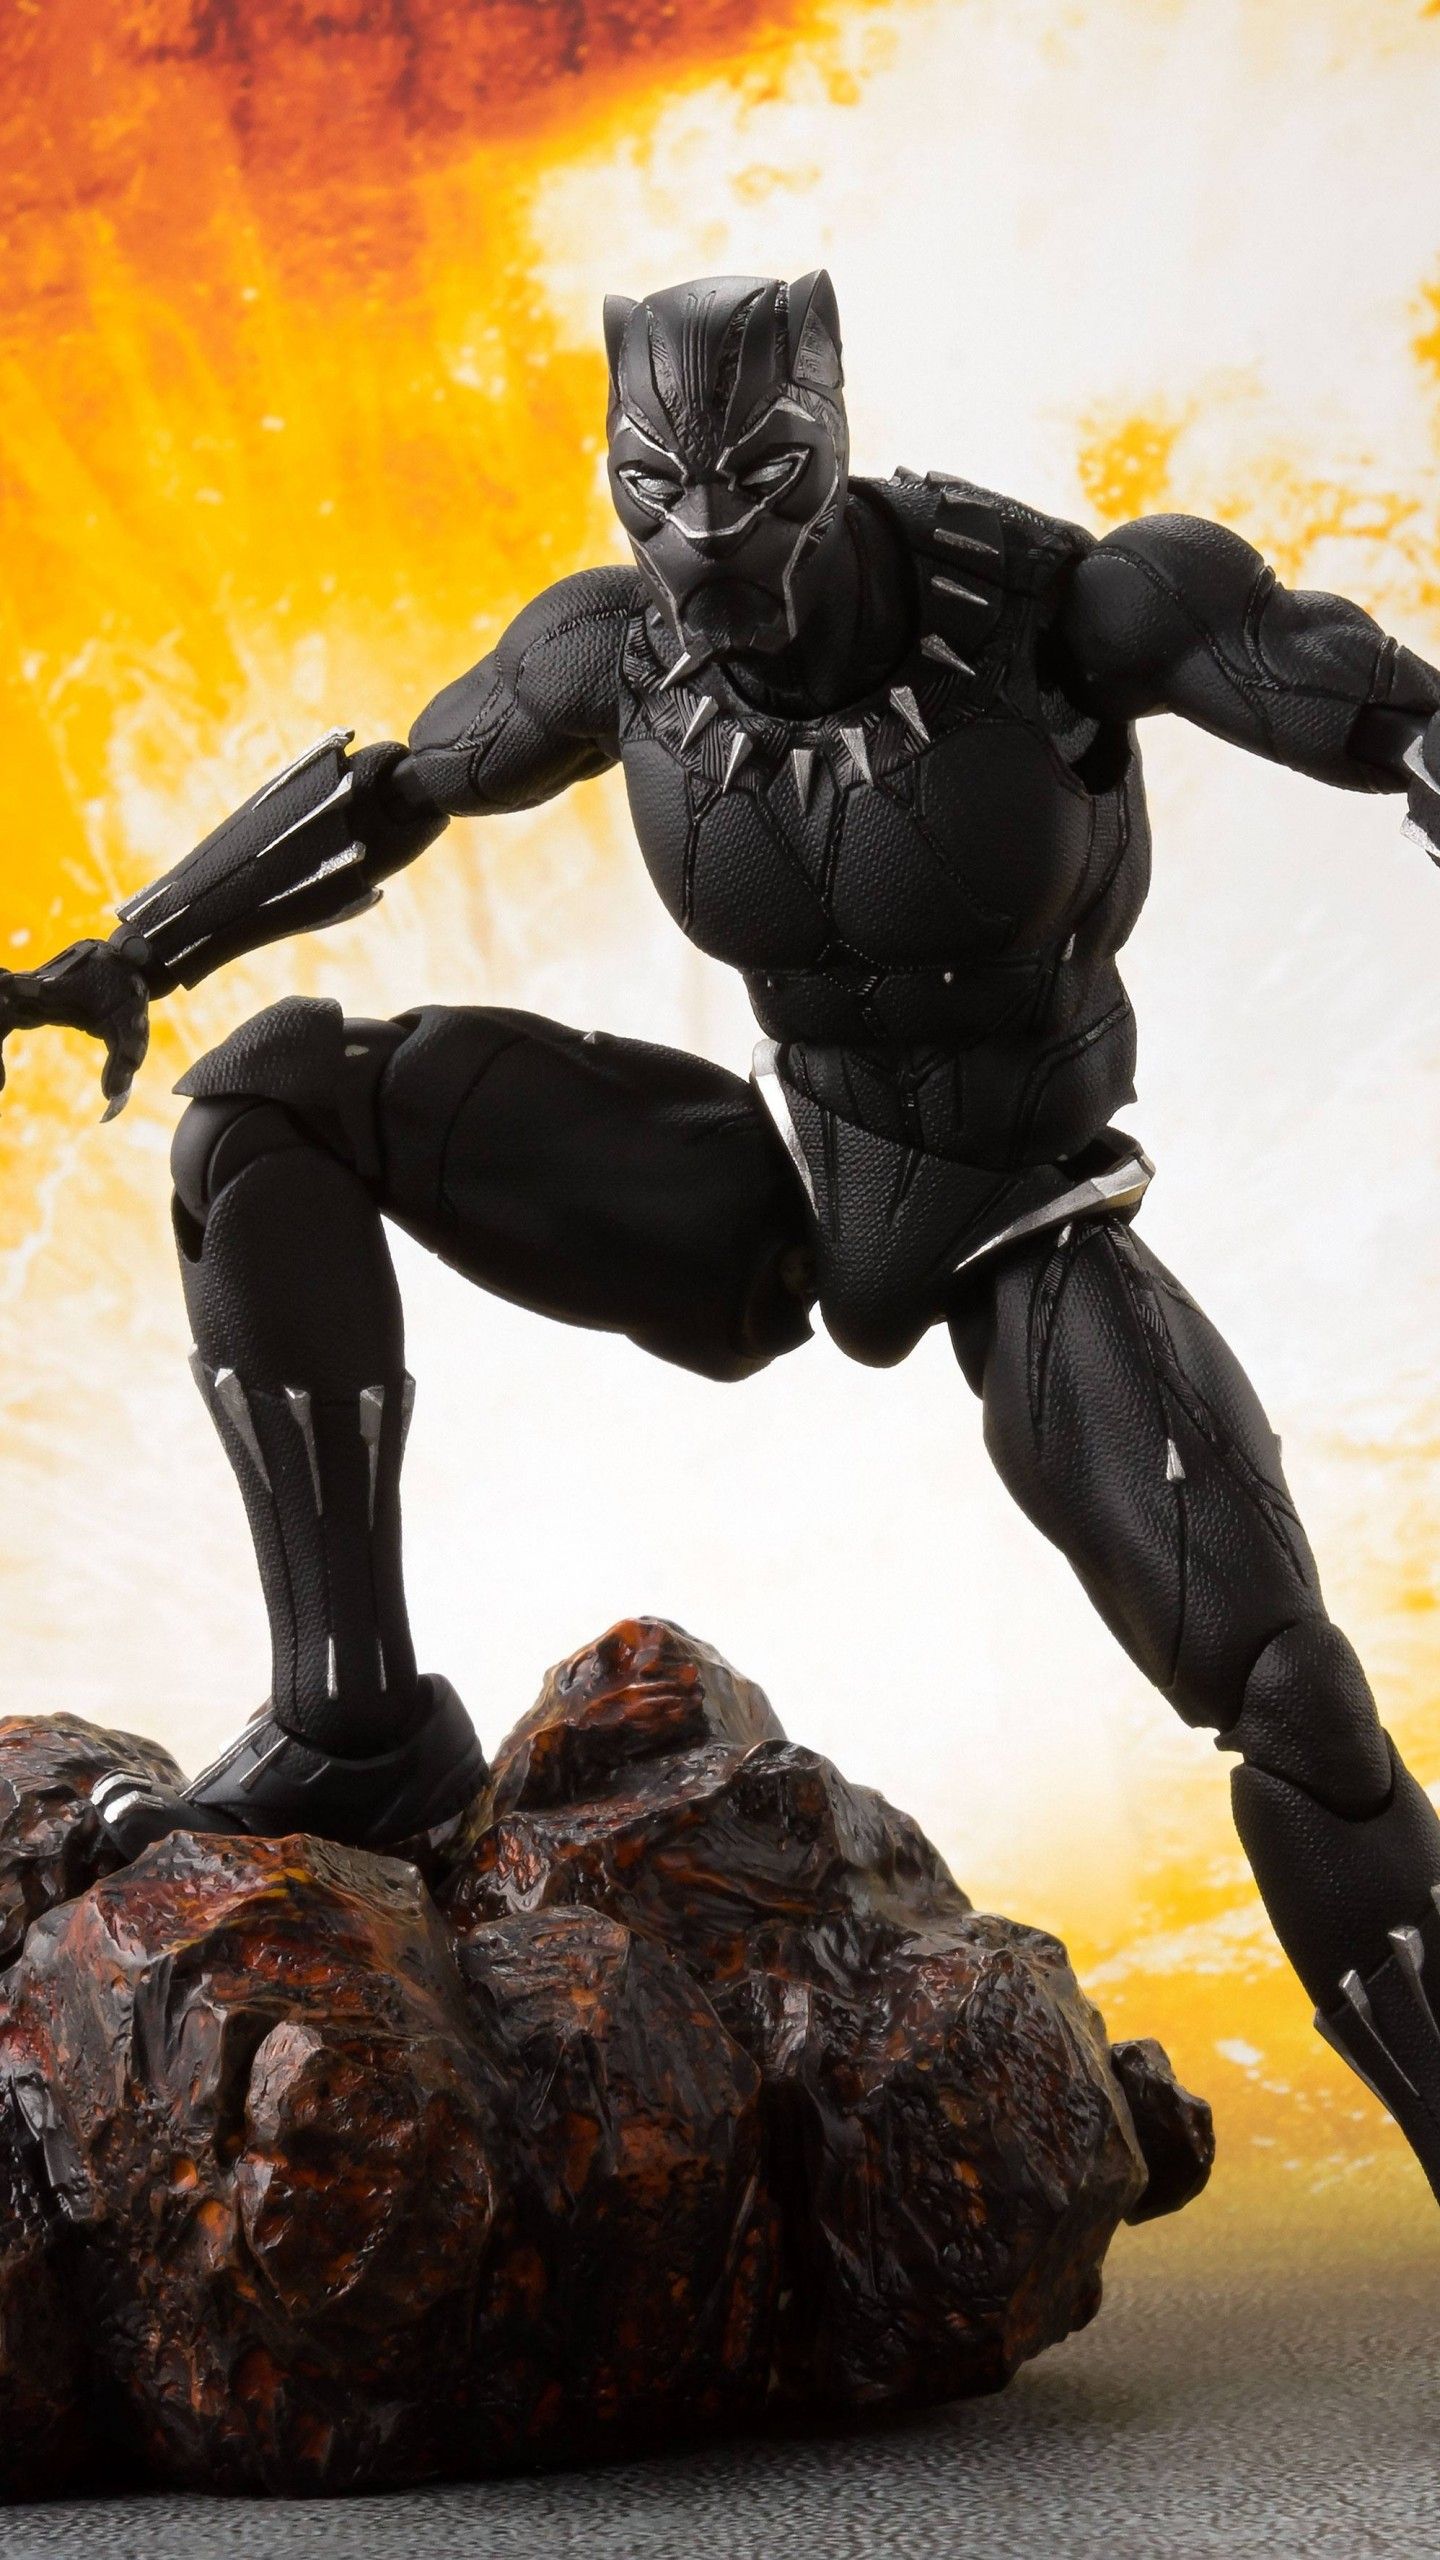 Wallpaper Black Panther, Action figure, 5K, Creative Graphics,. Wallpaper for iPhone, Android, Mobile and Desktop